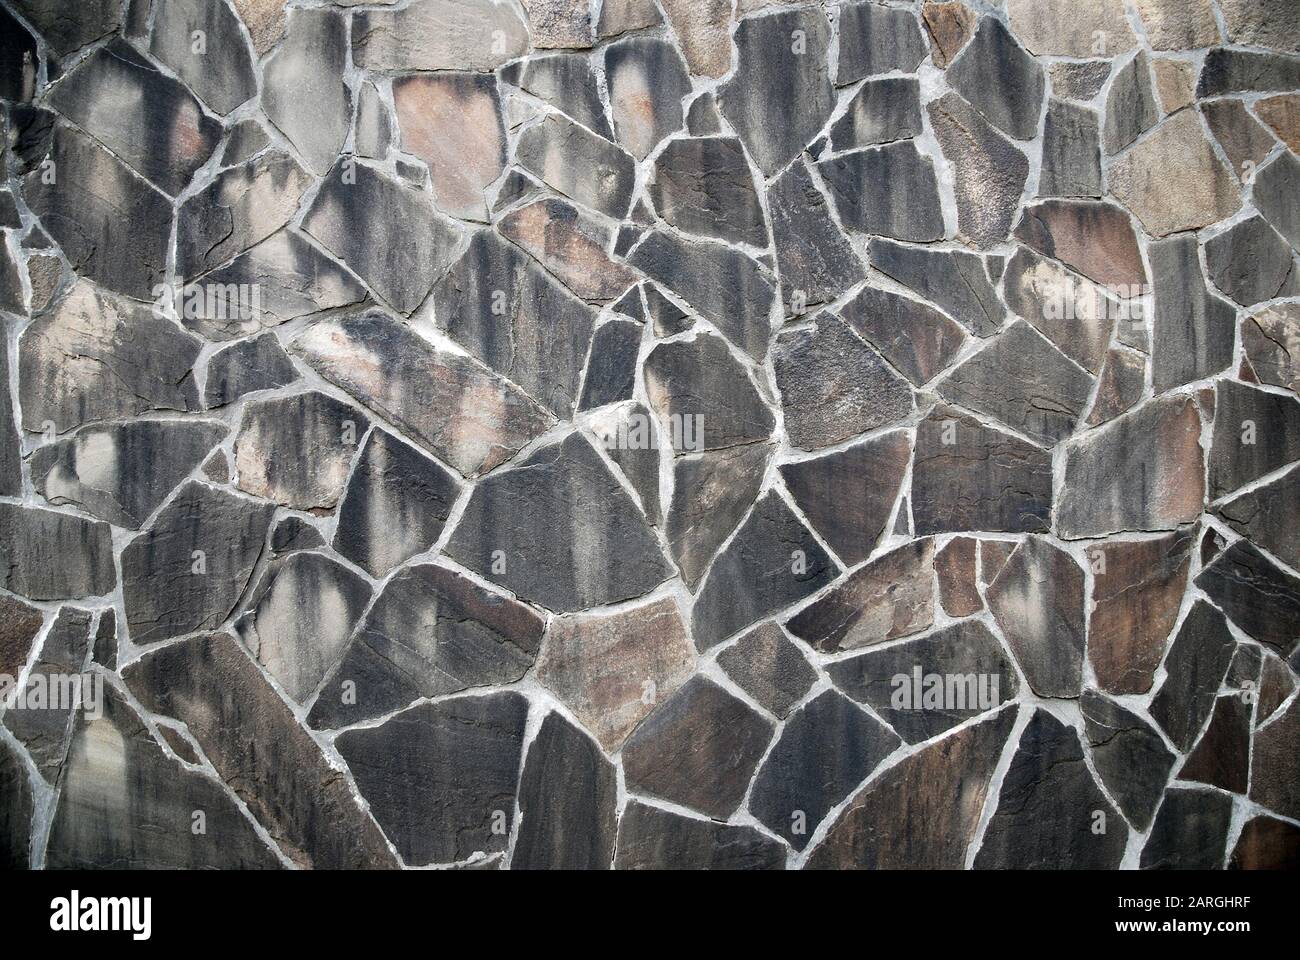 Natural slate stone wall of irregular polygons in gray brown colors Stock Photo